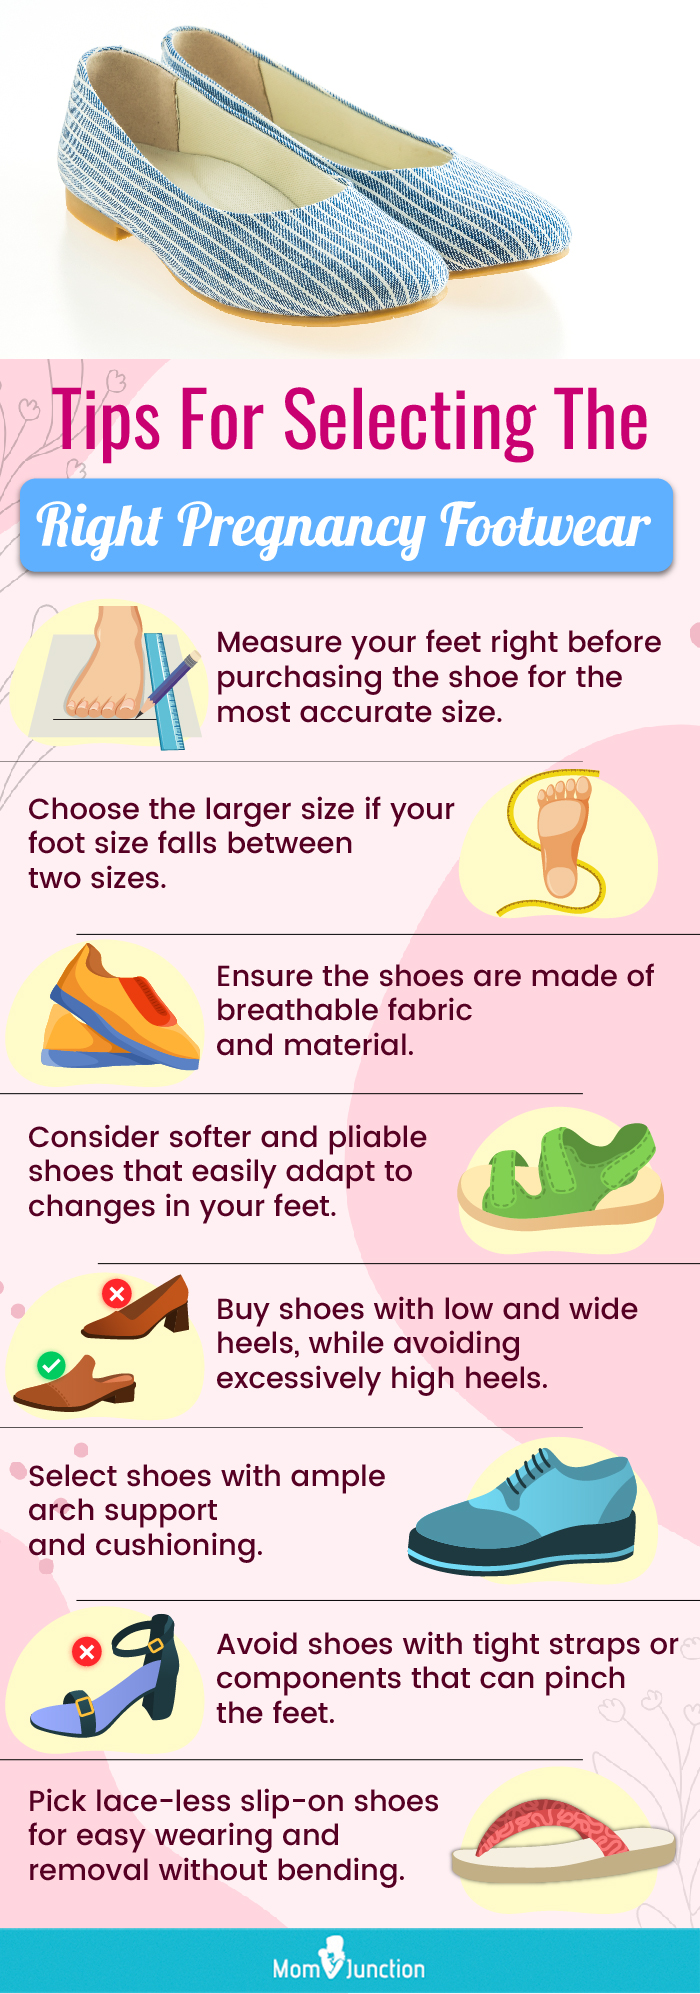 Tips For Selecting The Right Pregnancy Footwear (infographic)